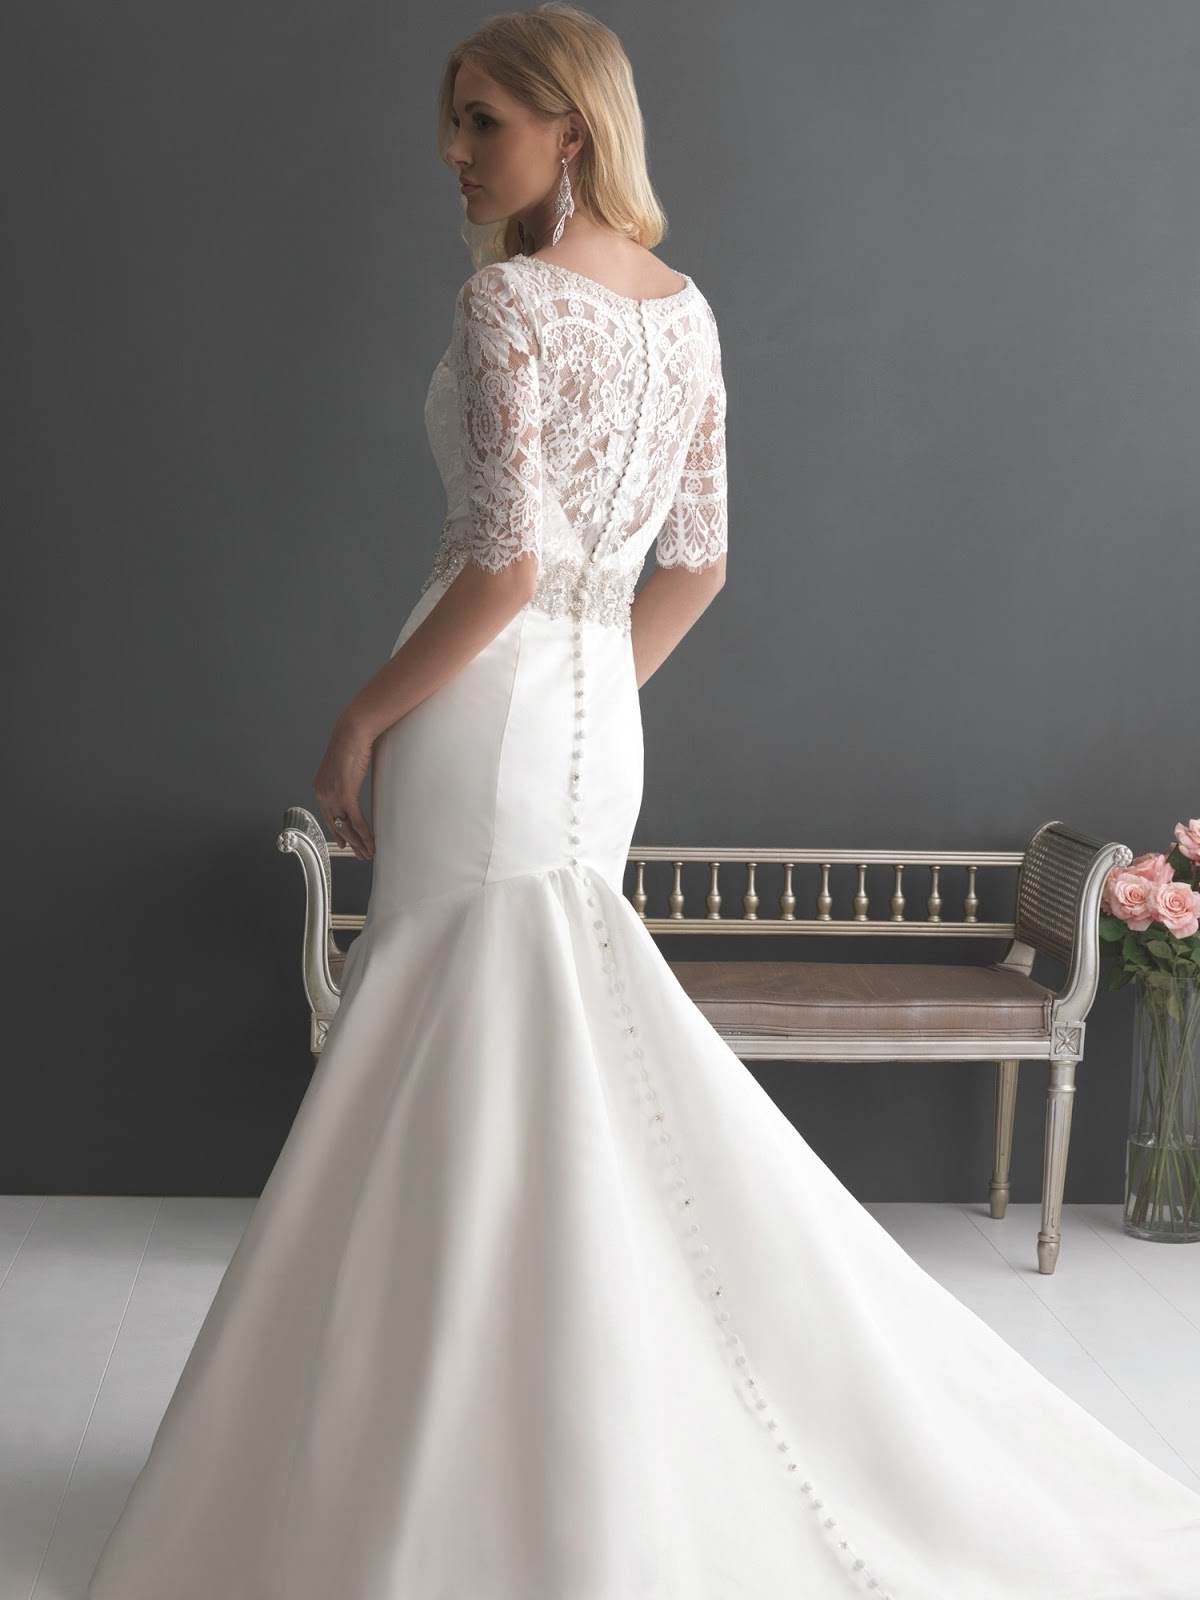 lace mermaid wedding dress with long sleeves Allure Wedding Dresses Fall 2013 Collection